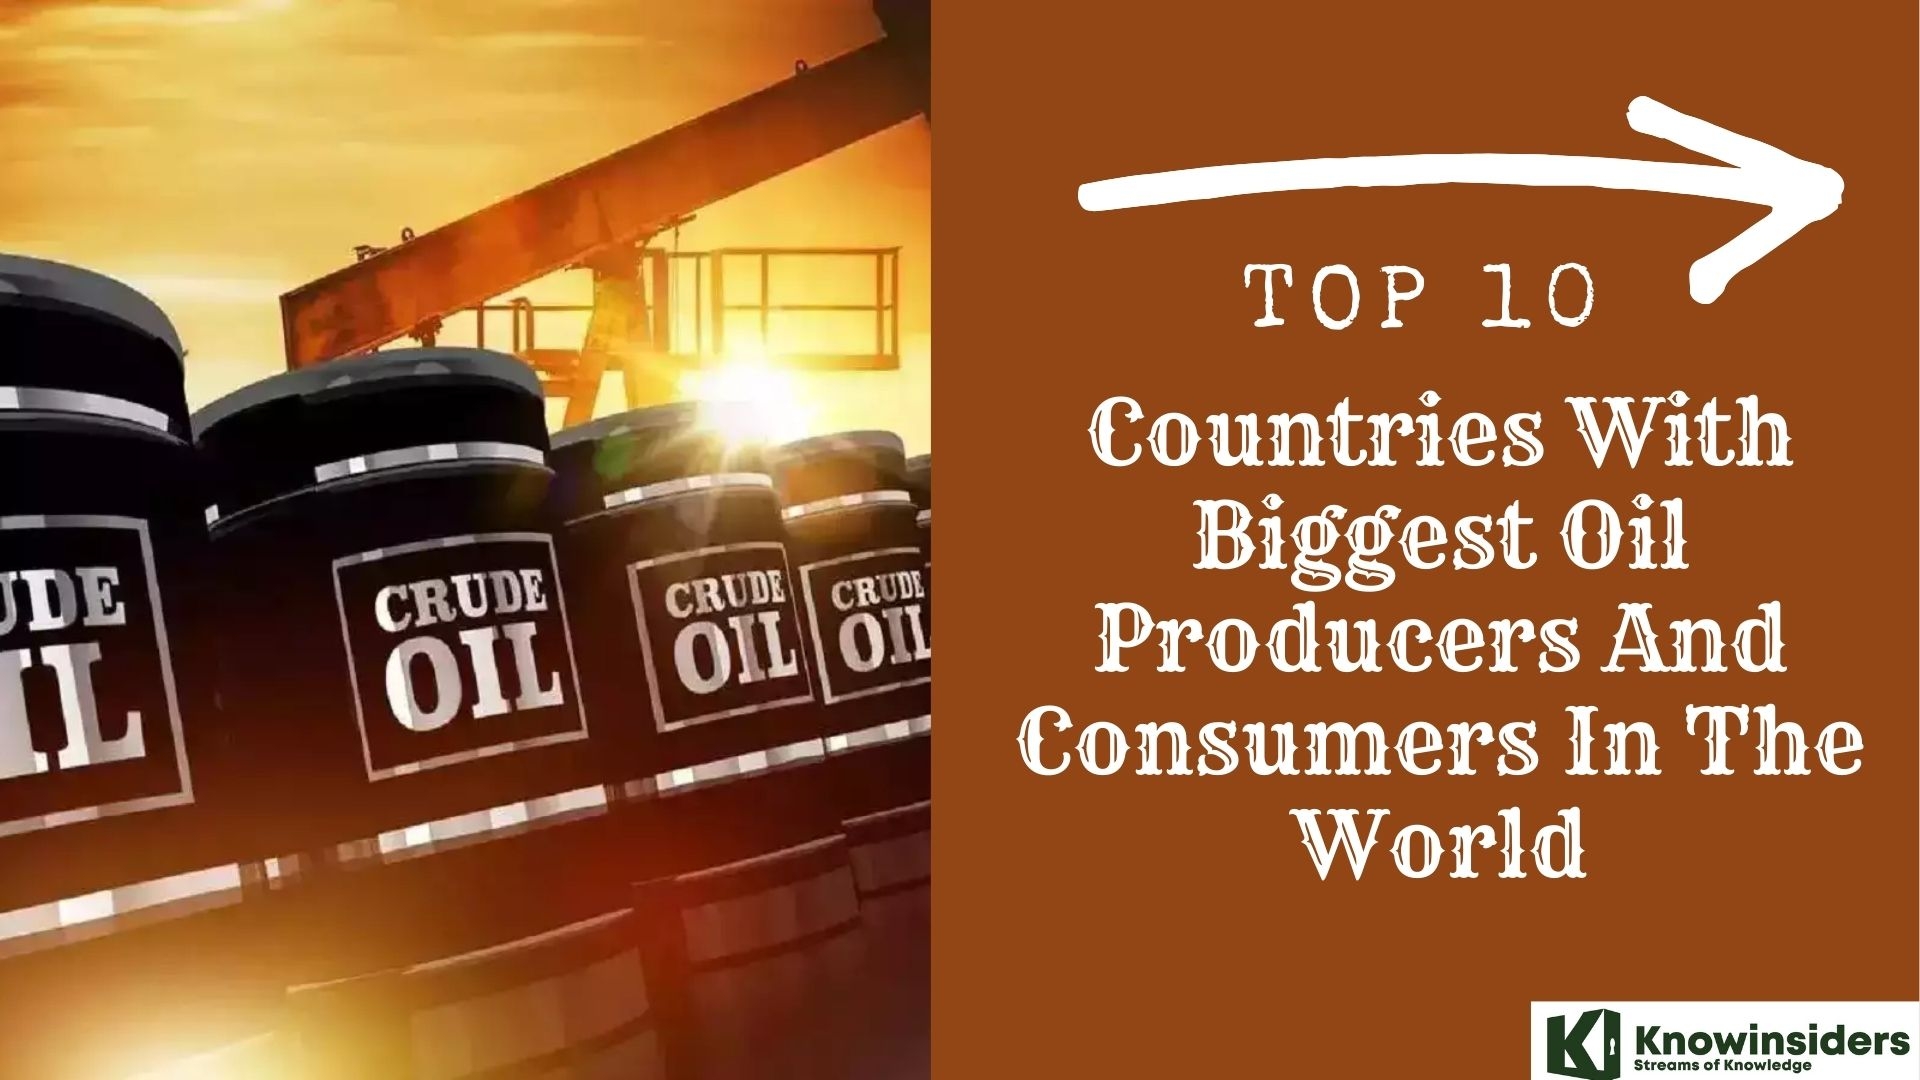 Top 10 Countries With Biggest Oil Producers And Consumers In The World